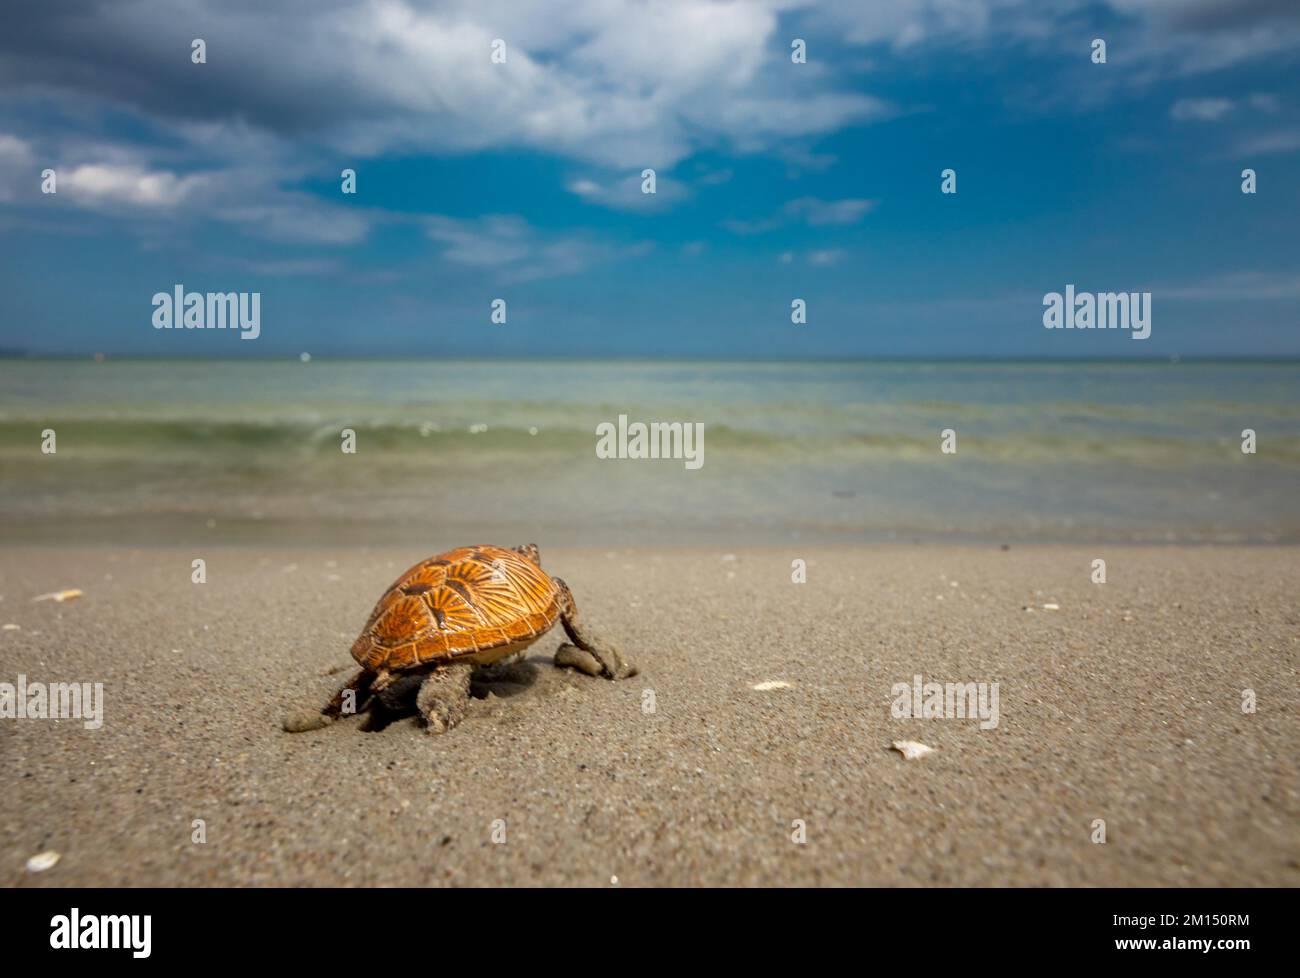 A closeup of an Ornate box turtle on the beach under the sunlight with a blurry background Stock Photo